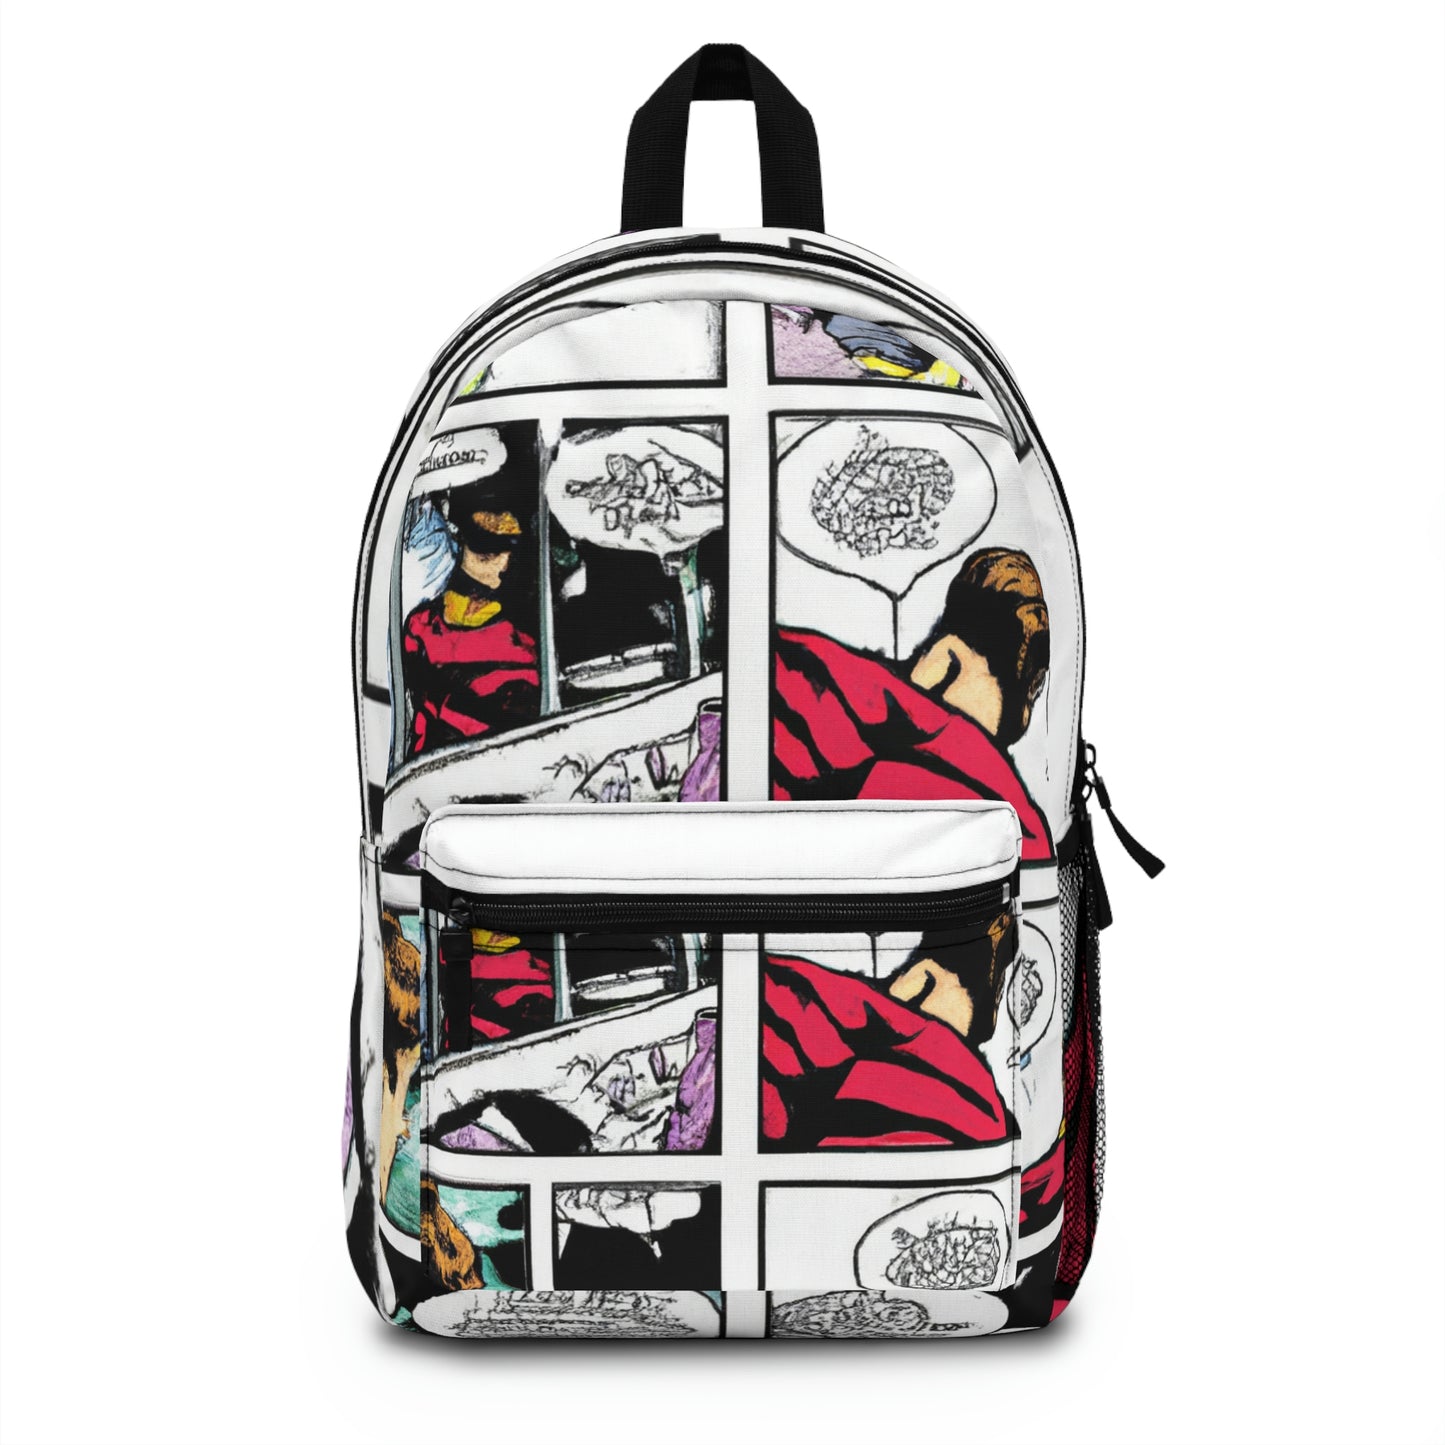 Sparrowwing the Mighty - Comic Book Backpack